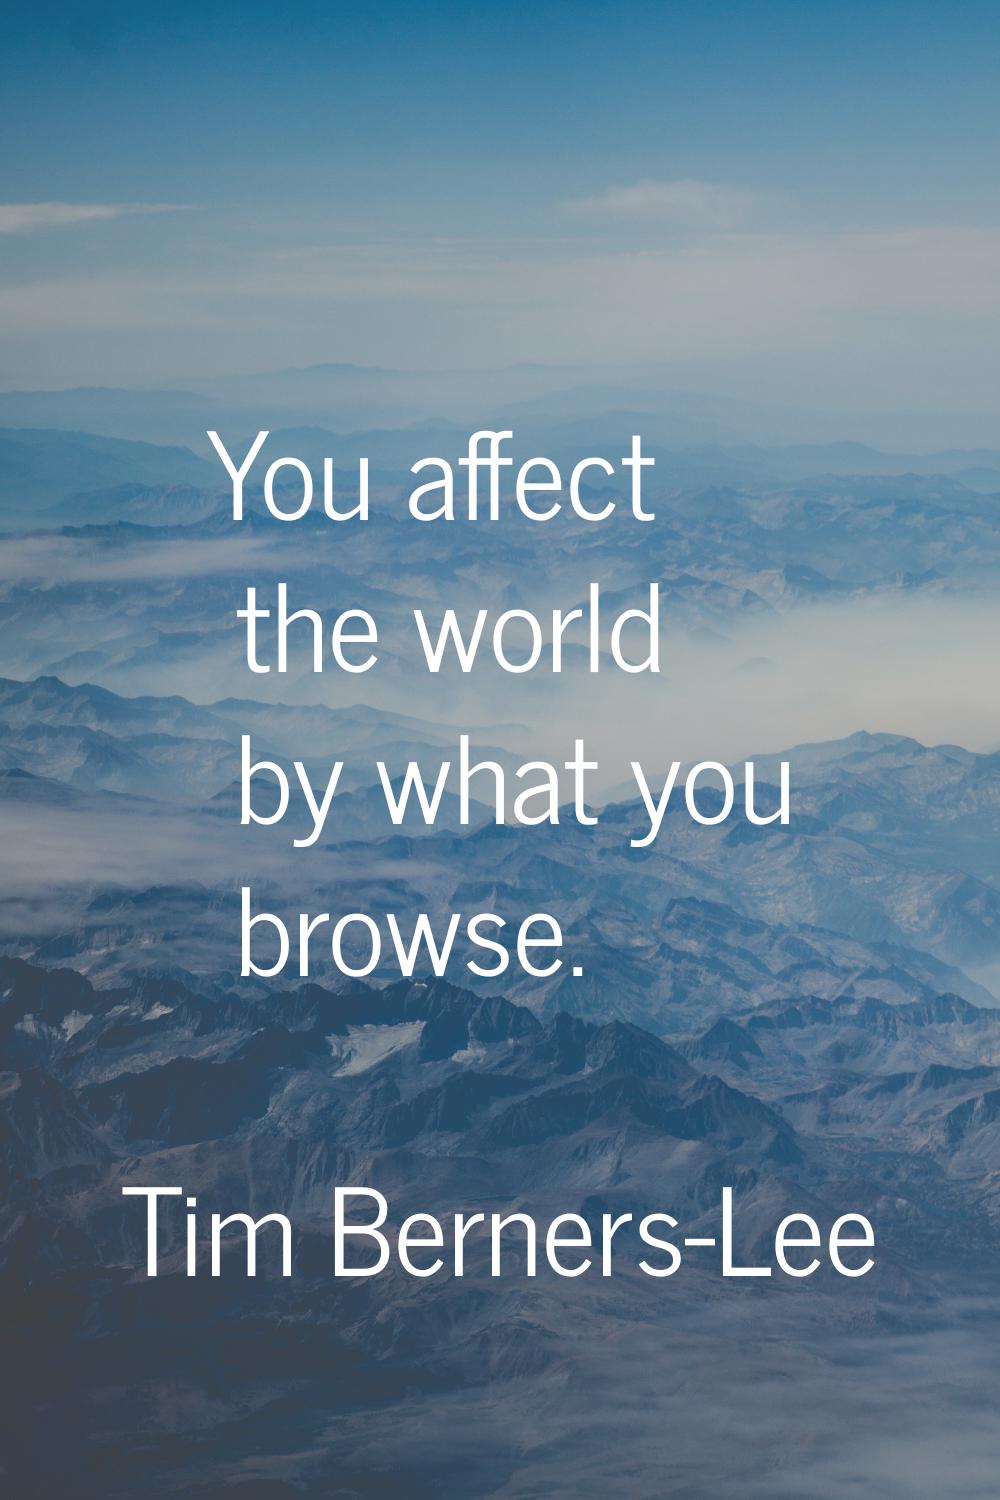 You affect the world by what you browse.